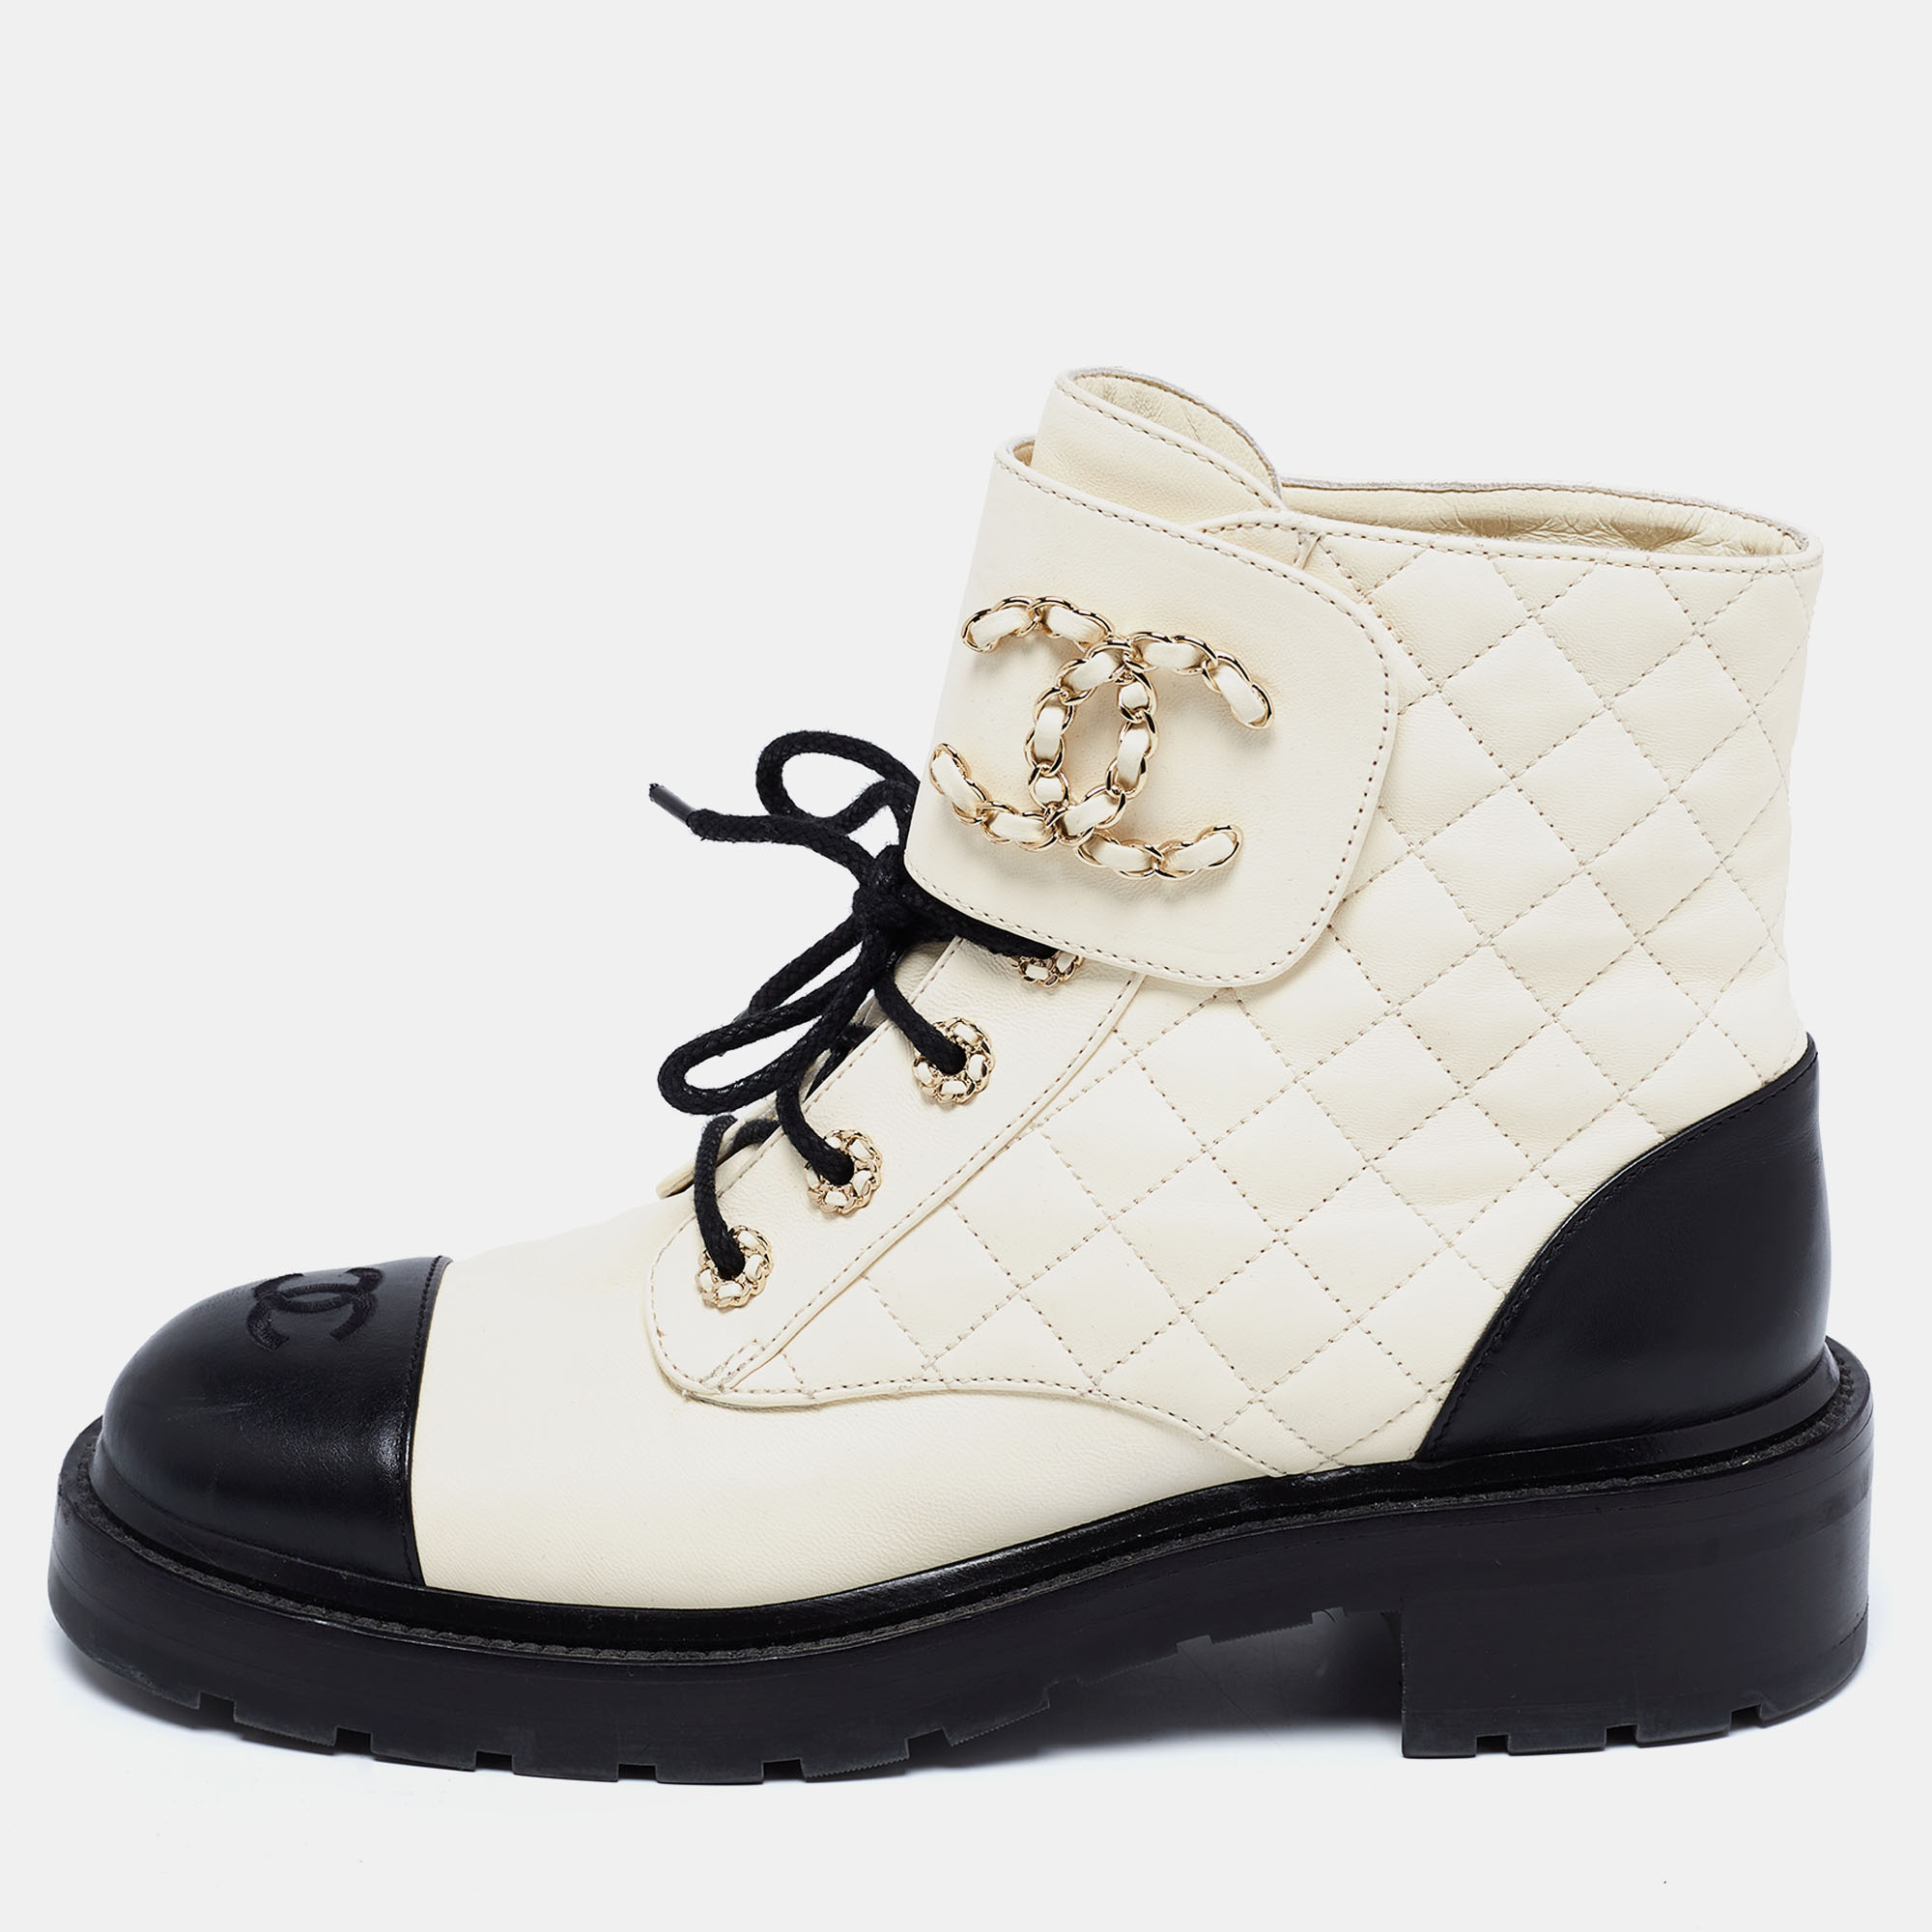 Pre-owned White/black Quilted Leather Cc Cap Toe Chain Link Logo Combat  Boots Size 41